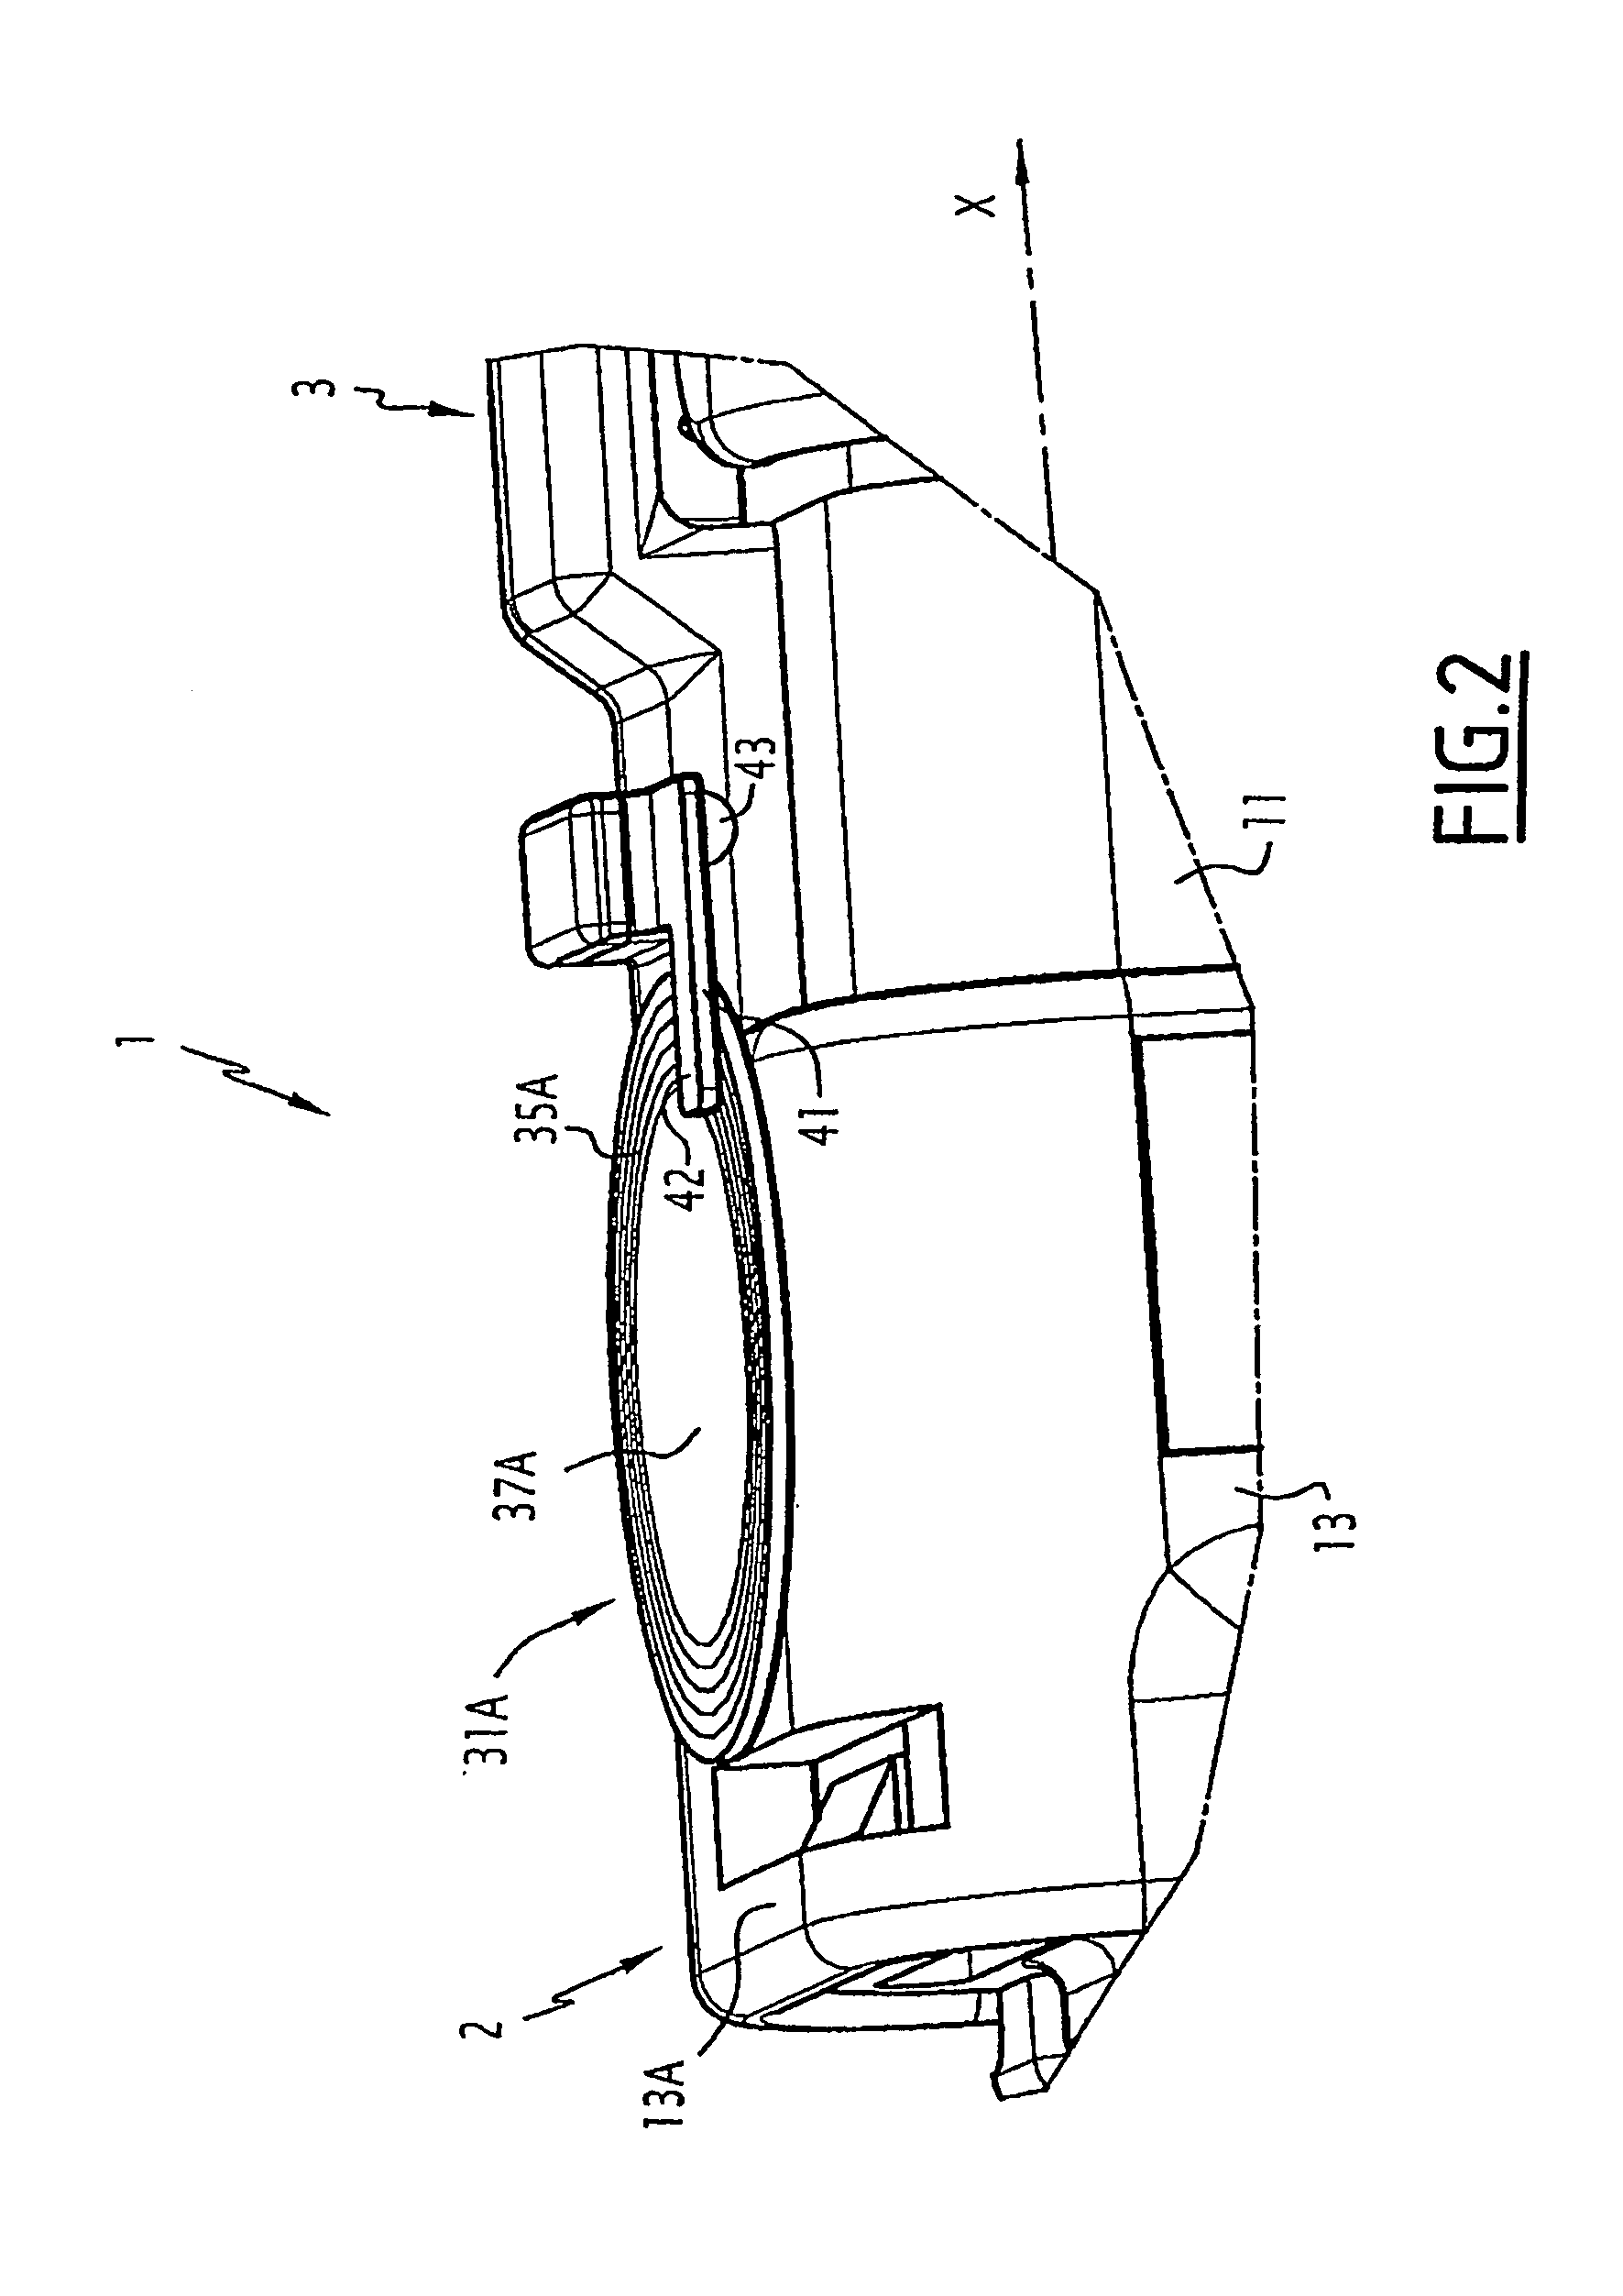 Electrical connecting device having mating state indication means